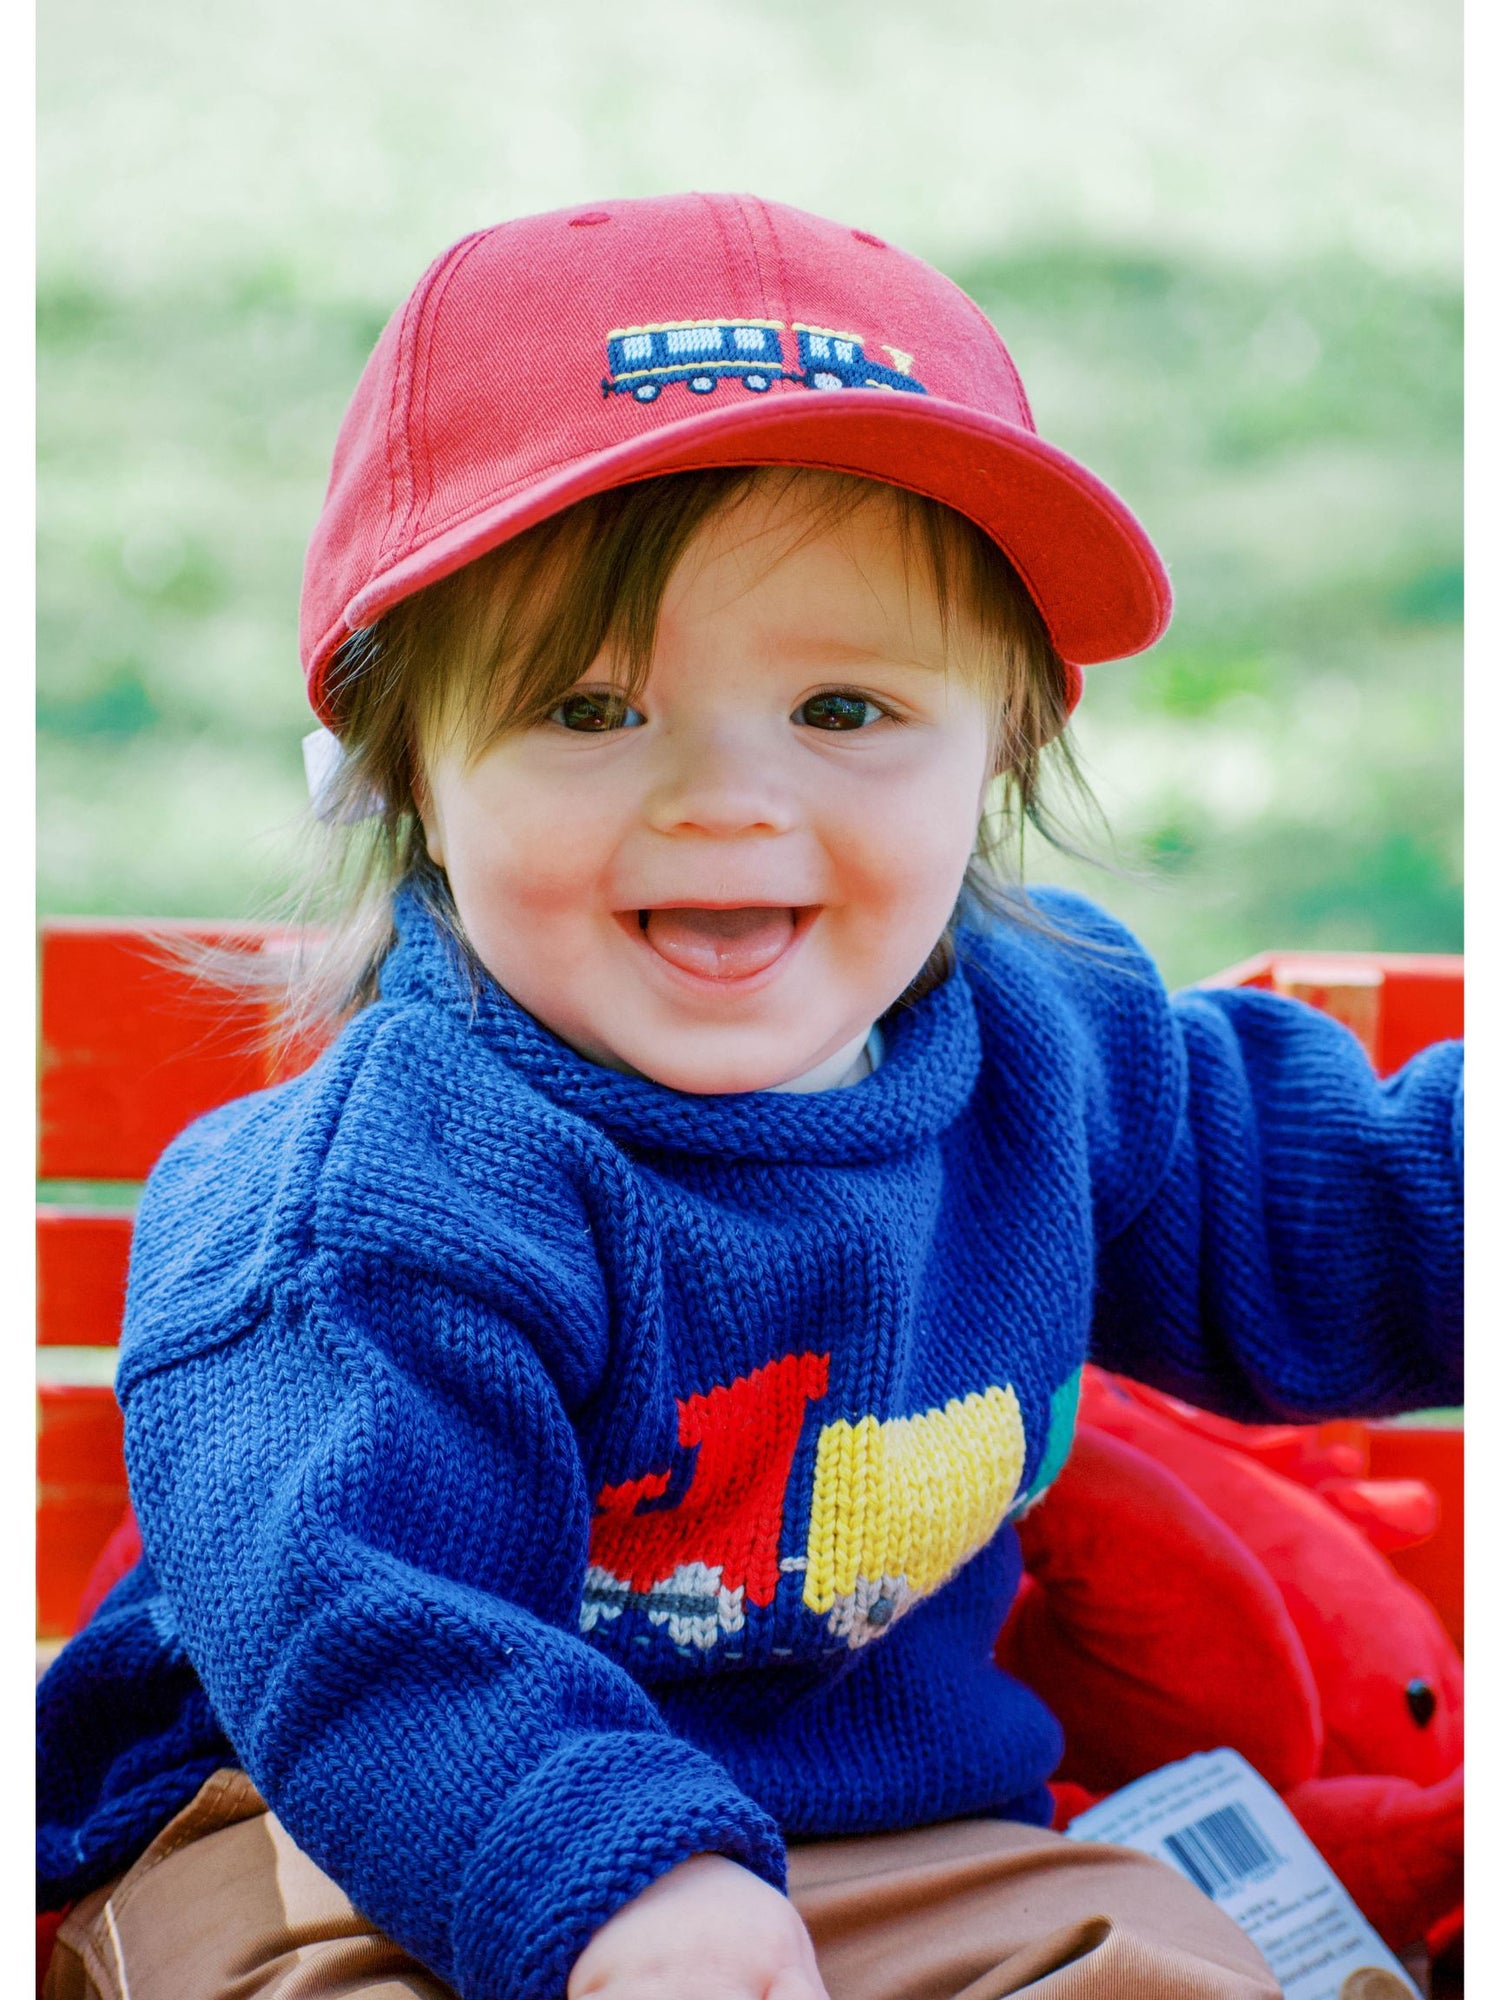 baby wearing train sweater and train hat